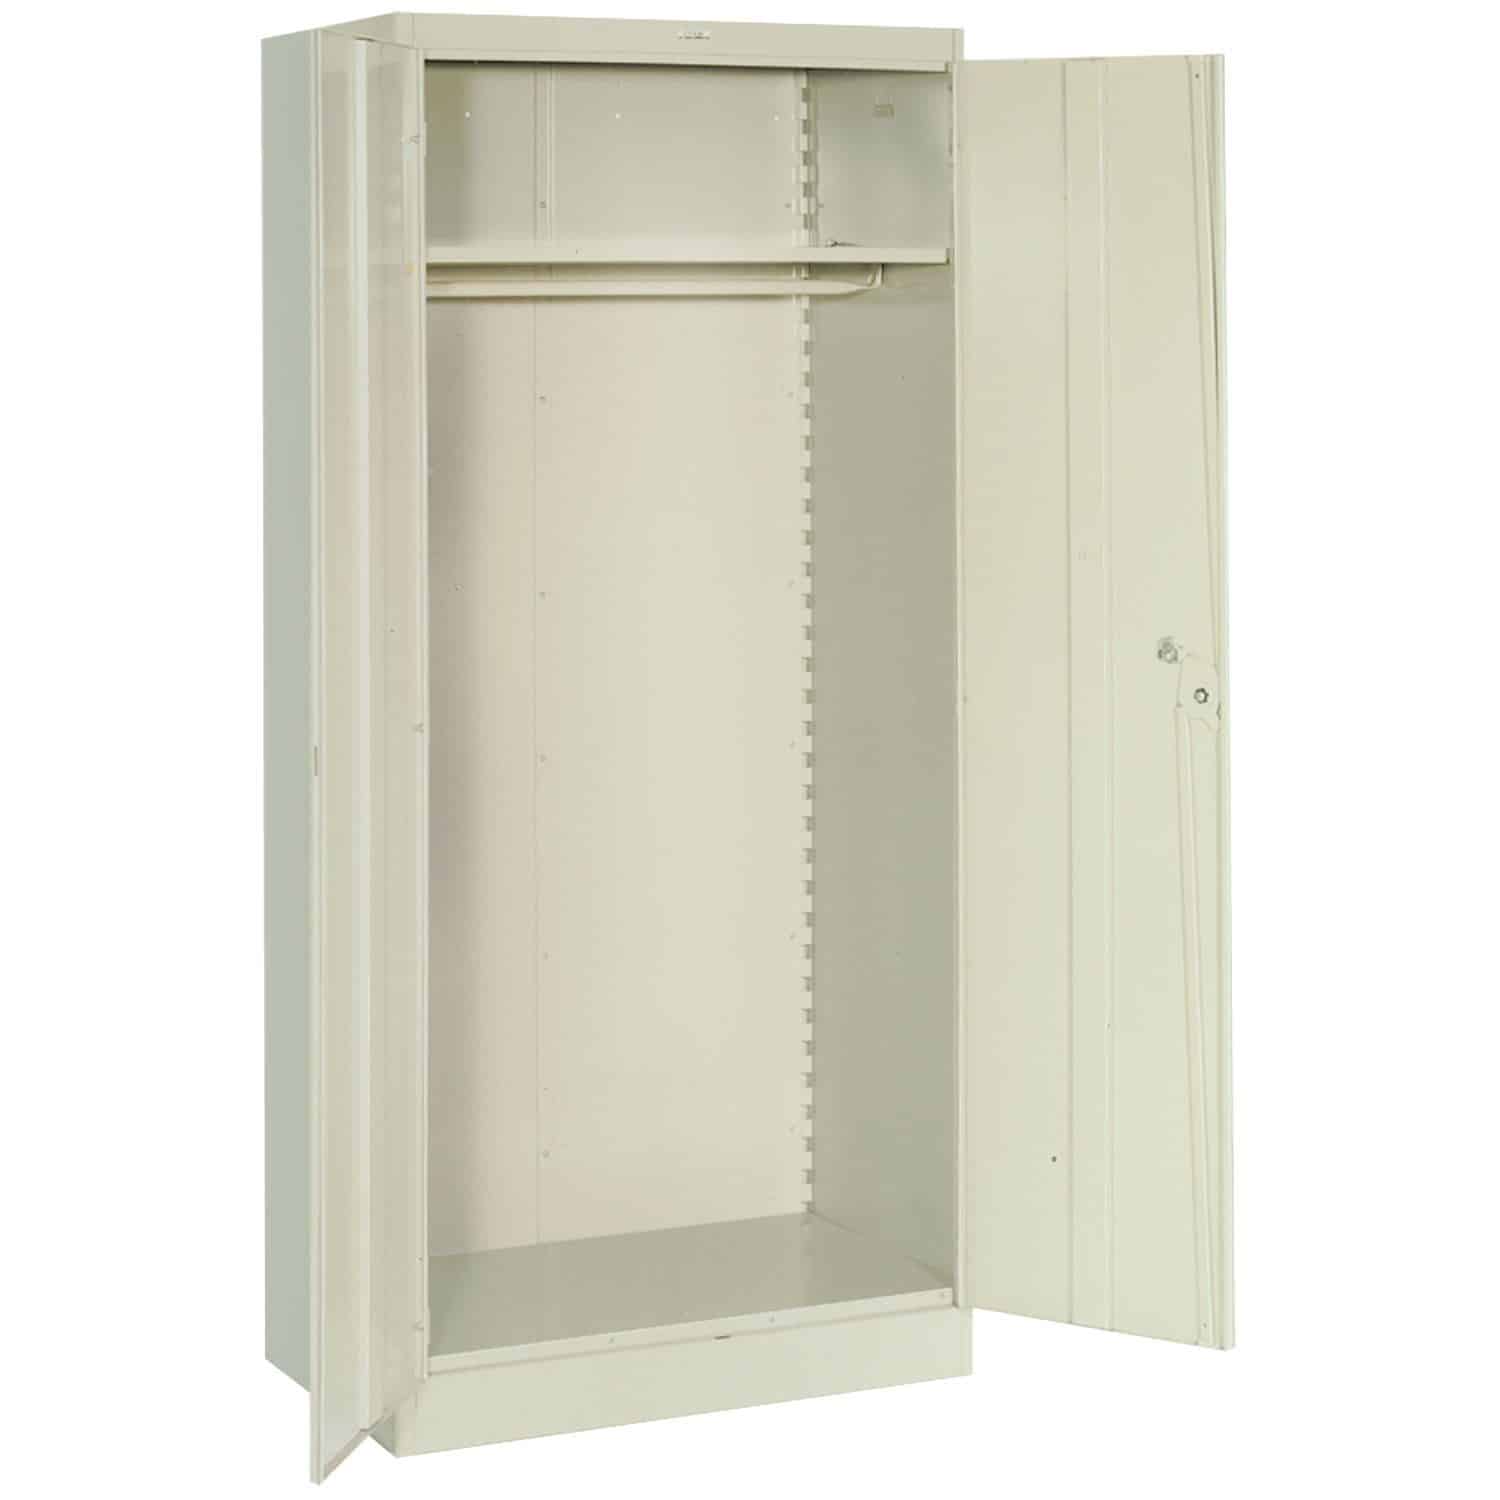 1086 Economical Wardrobe Cabinet Steel Storage Cabinets From Lyon